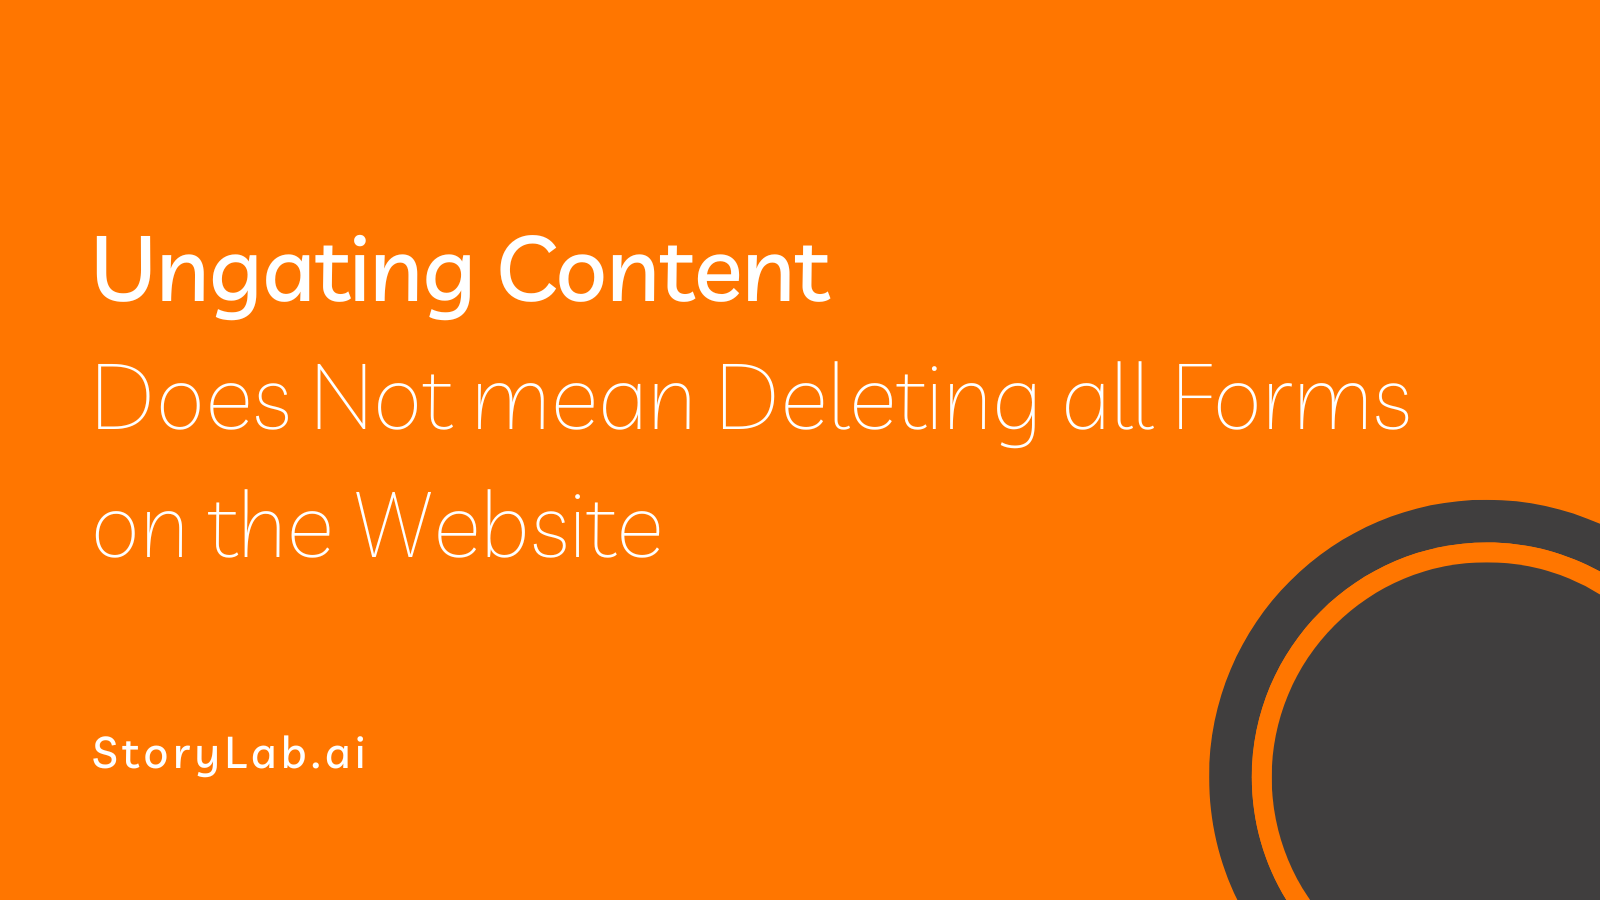 Ungating Content Does Not mean Deleting all Forms on the Website